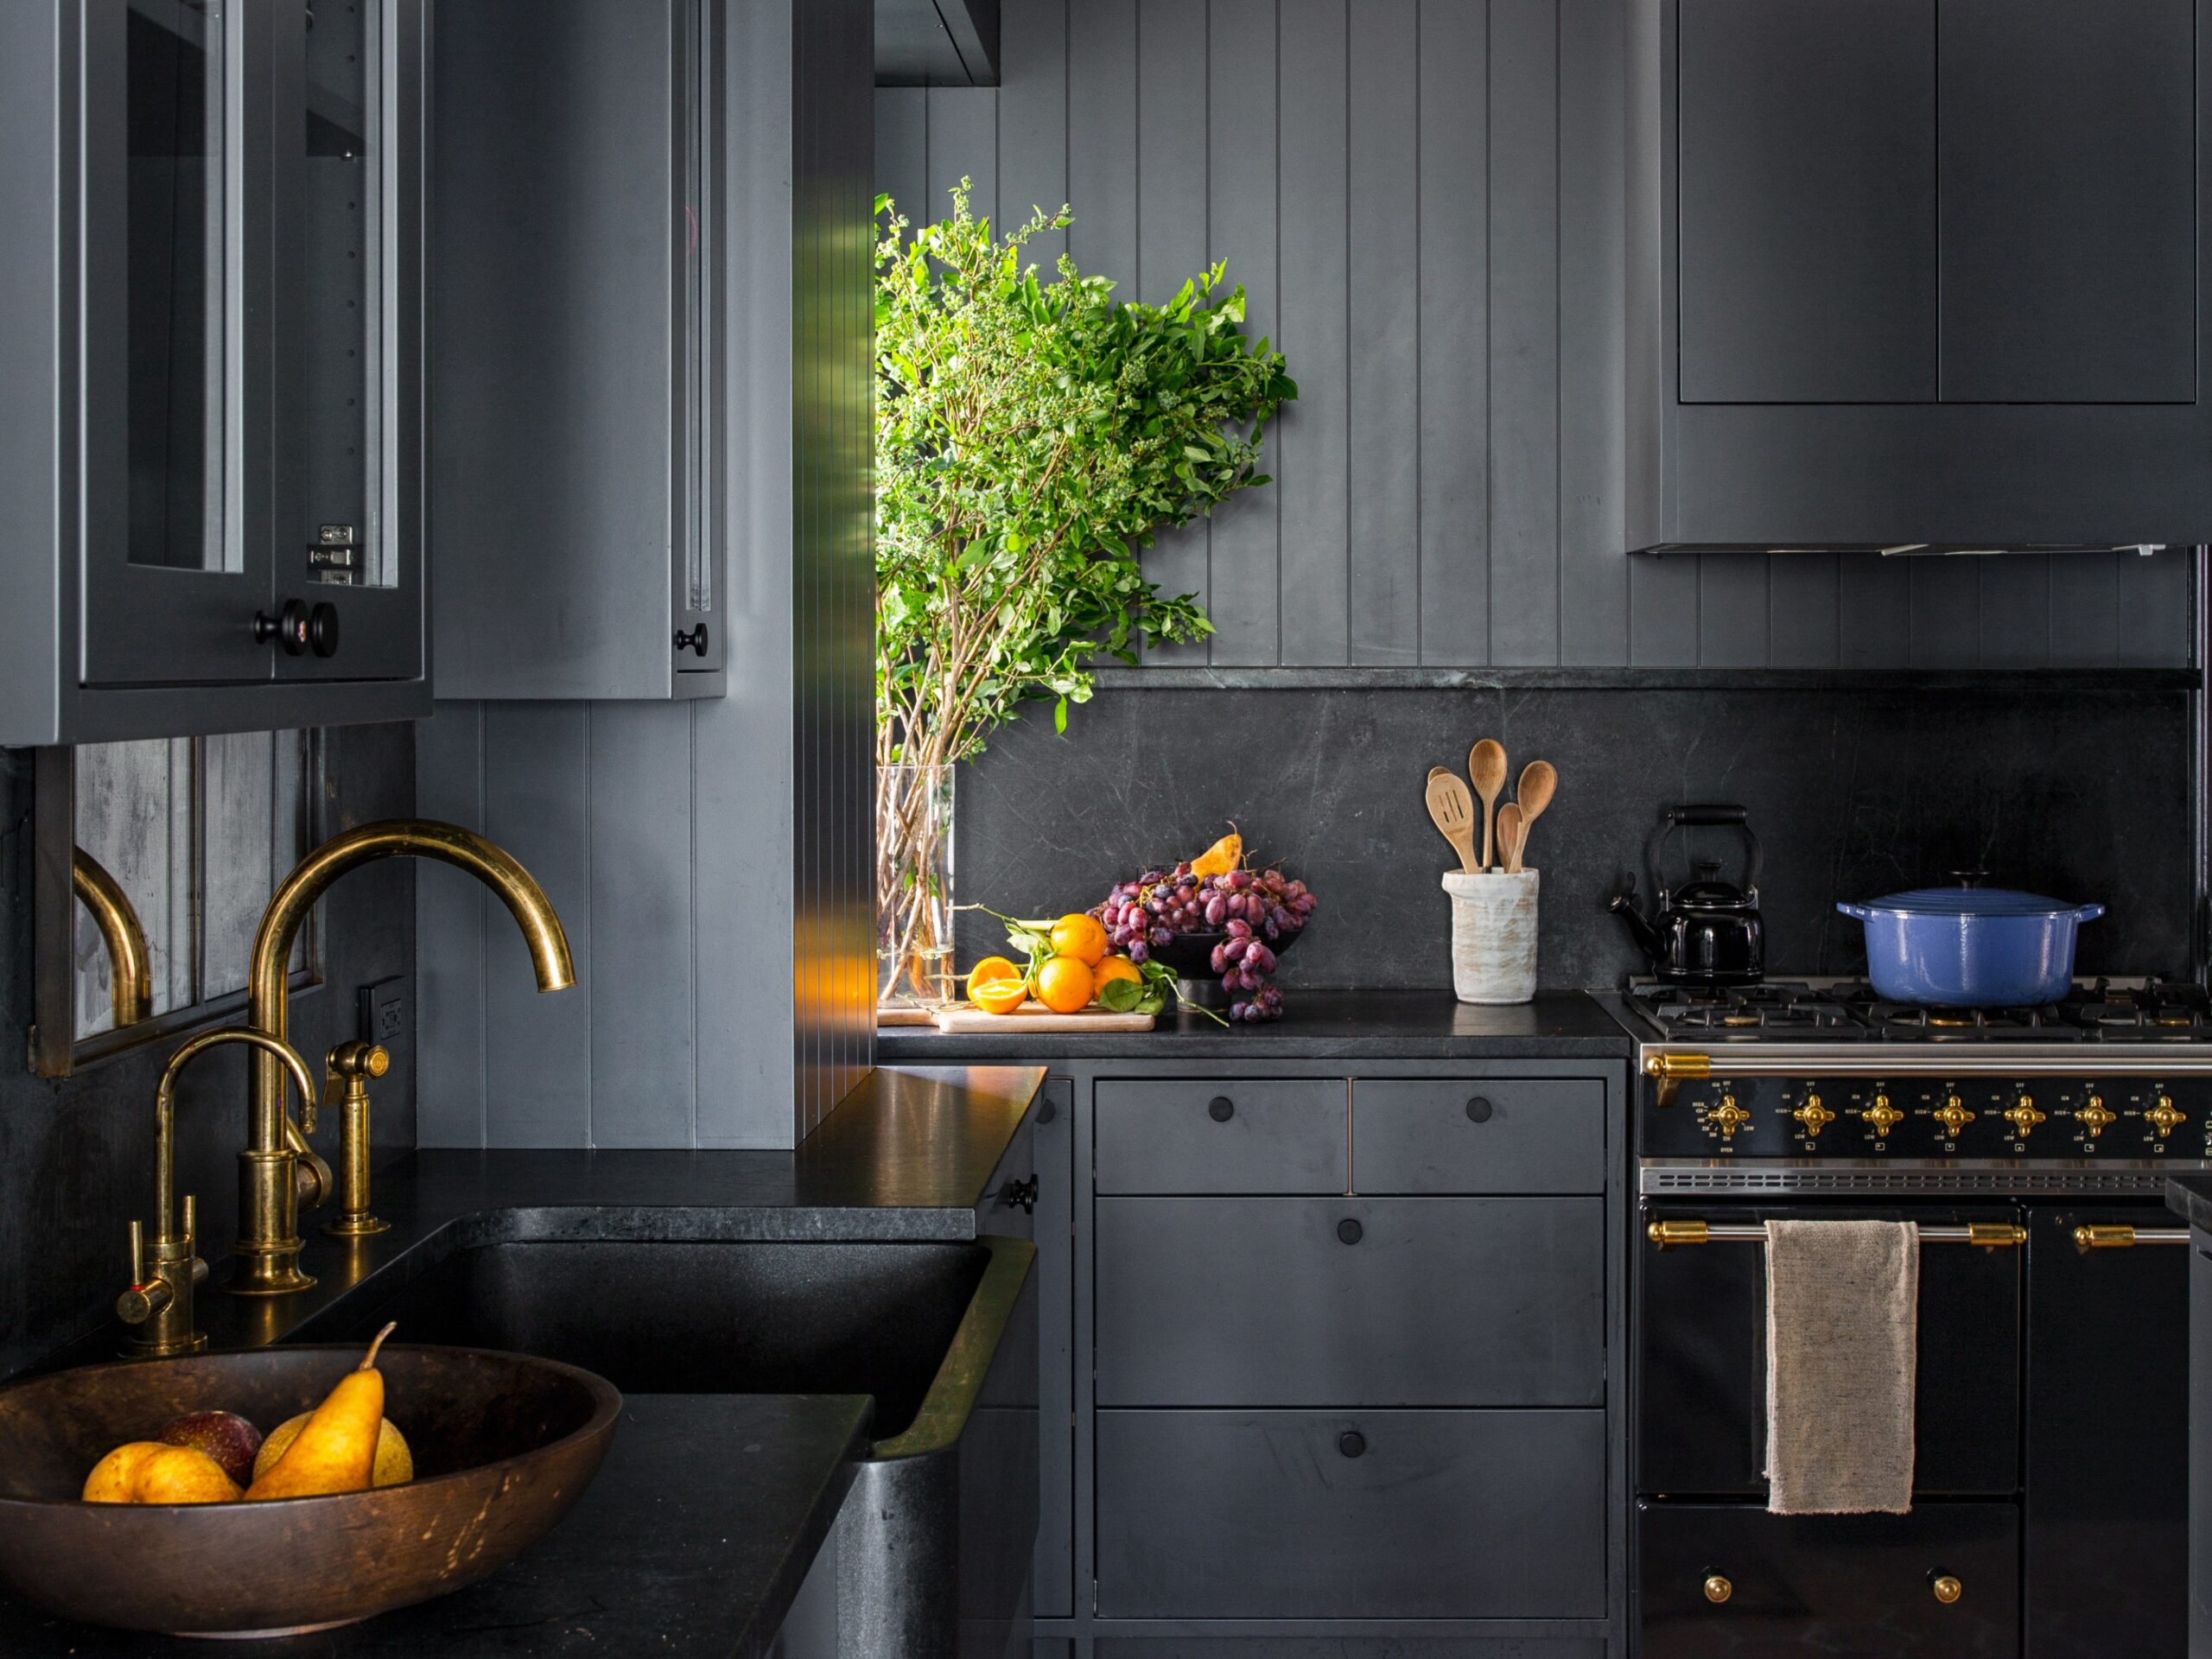 How Black Became the Kitchen